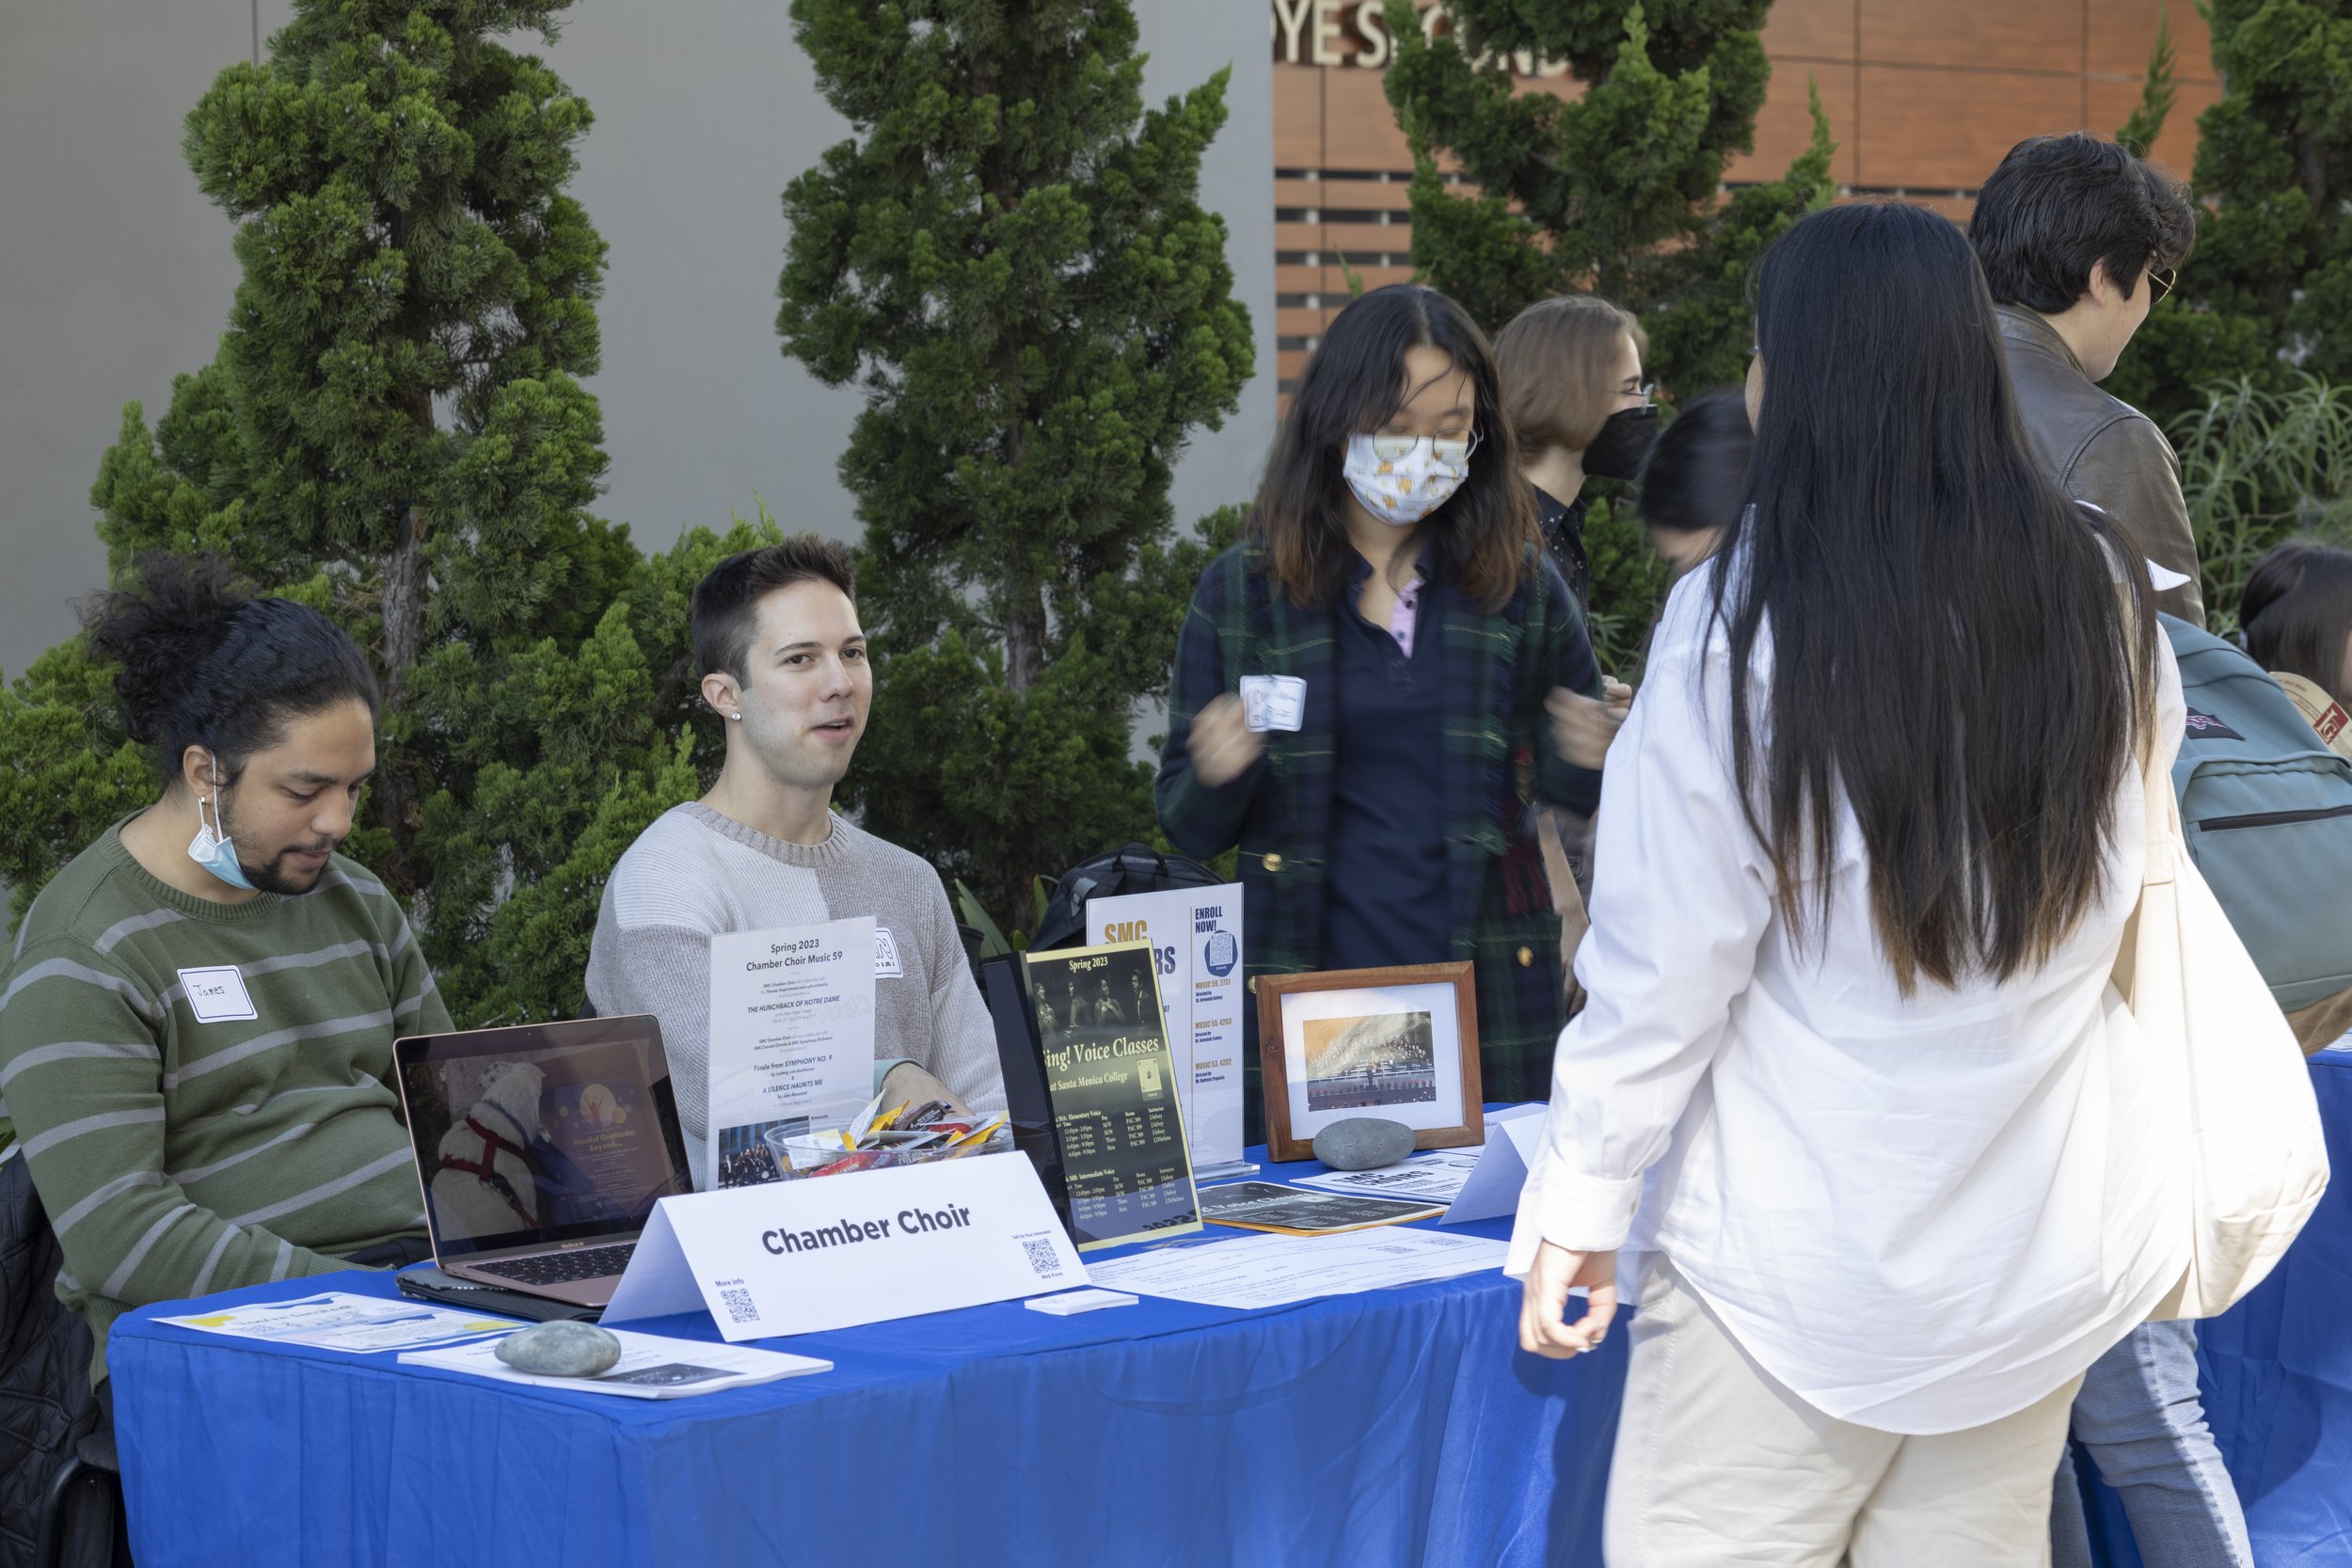  The Chamber Choir's table during the Santa Monica College Music Departments open house featured photos of past choir performances and QR codes to stay updated on the classes sign-up dates. November 15, 2022, Santa Monica, Calif. (Jamie Addison | The